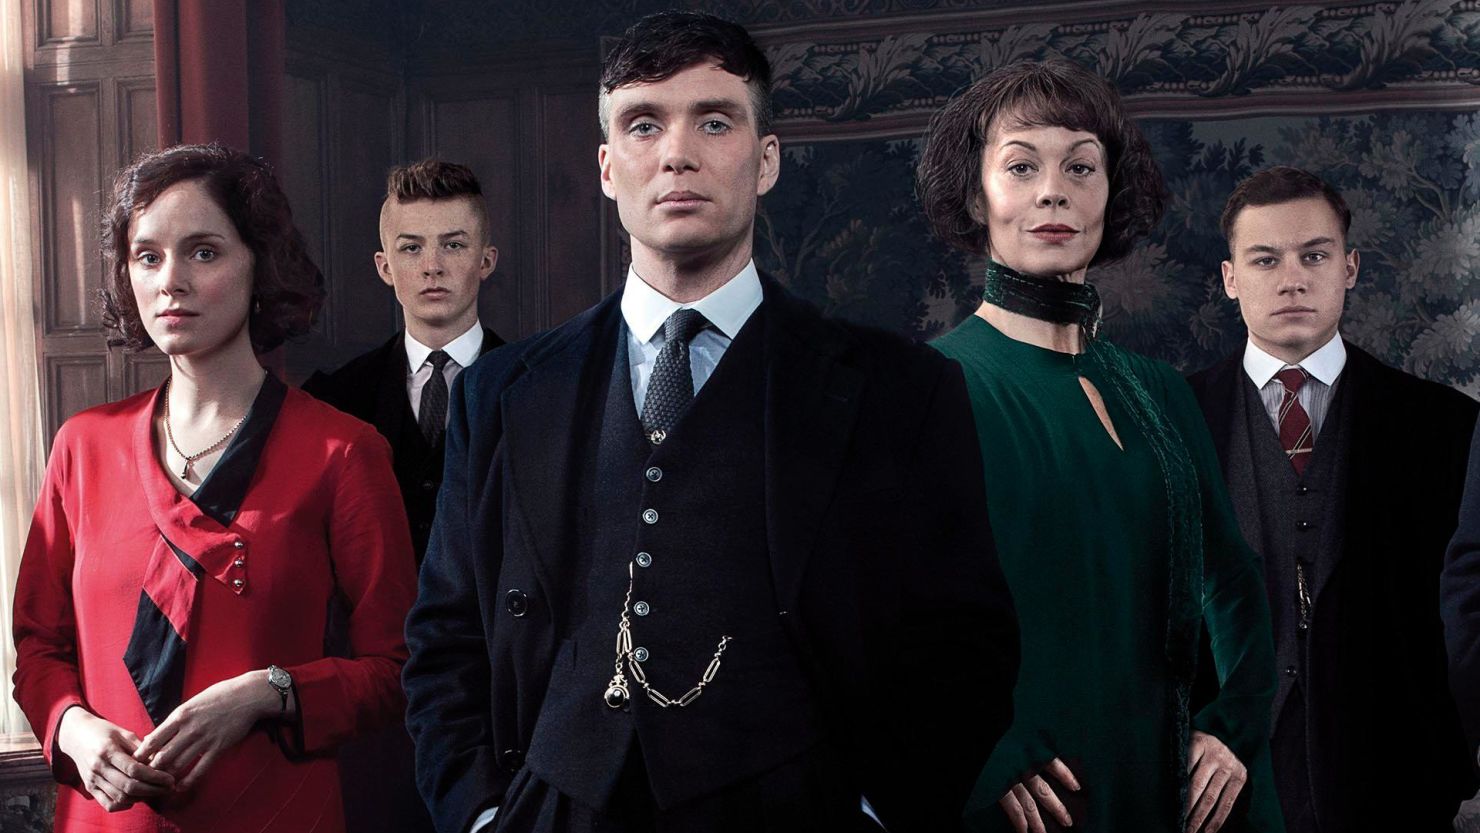 Cillian Murphy, pictured here as the character Tommy Shelby alongside Helen McCrory as Aunt Polly (second right) has said the late actor was "magnificent," "brave" and "courageous."